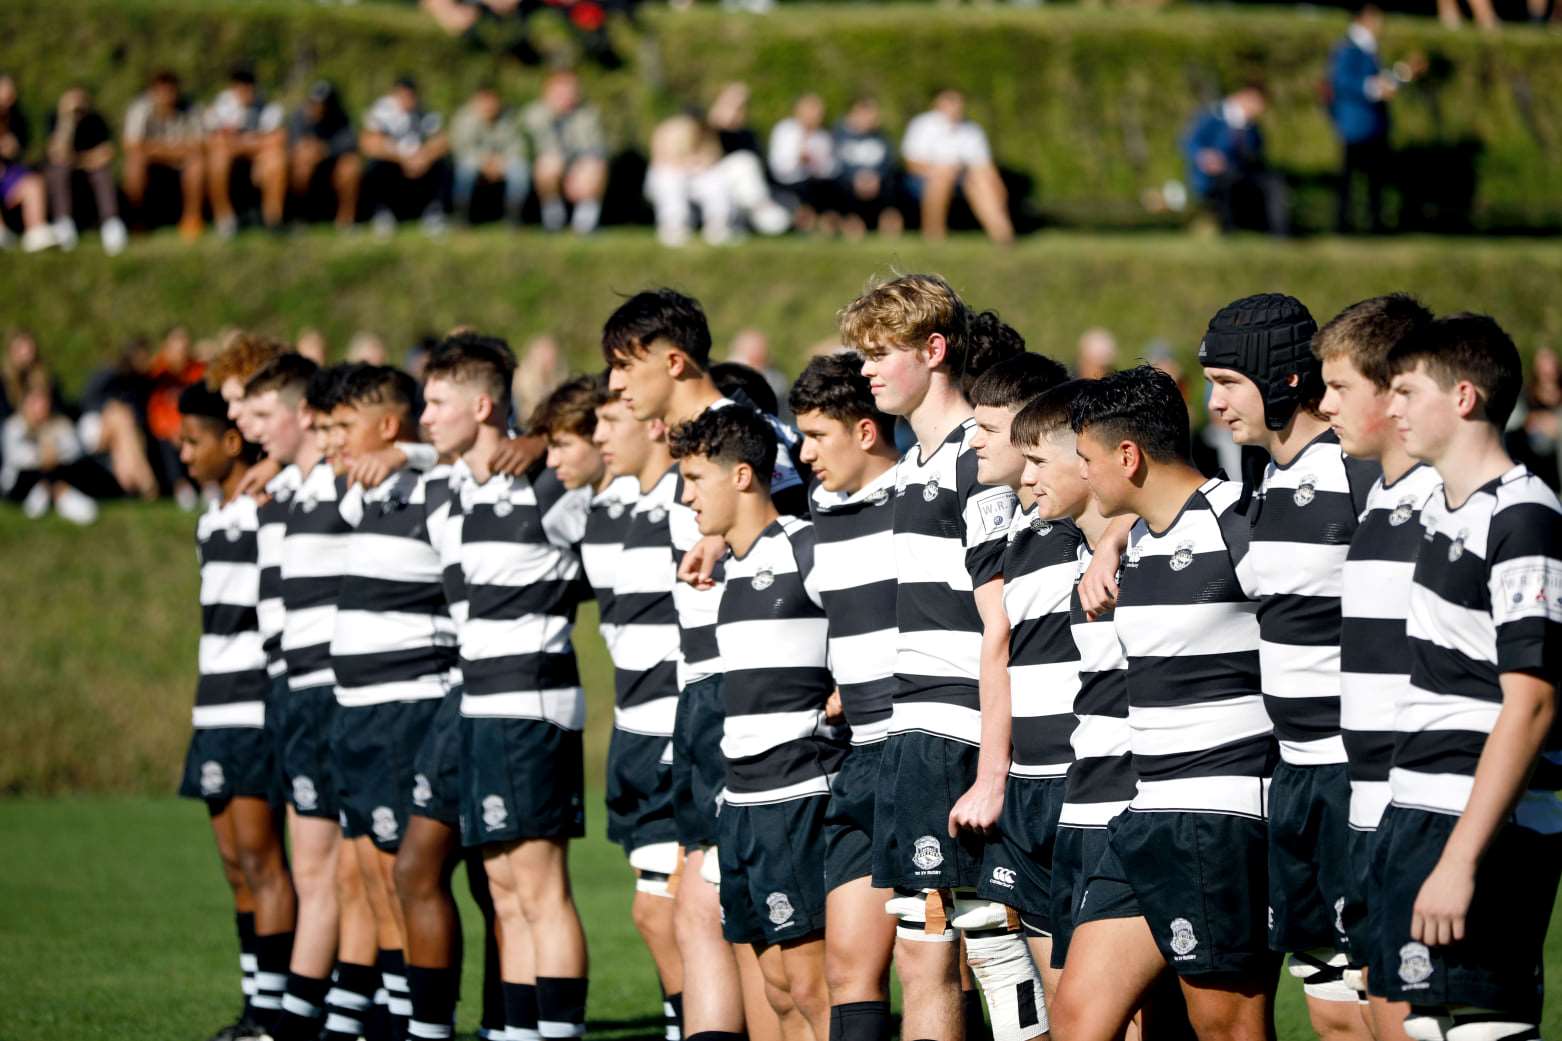 Opportunities for NPBHS 1st XV players